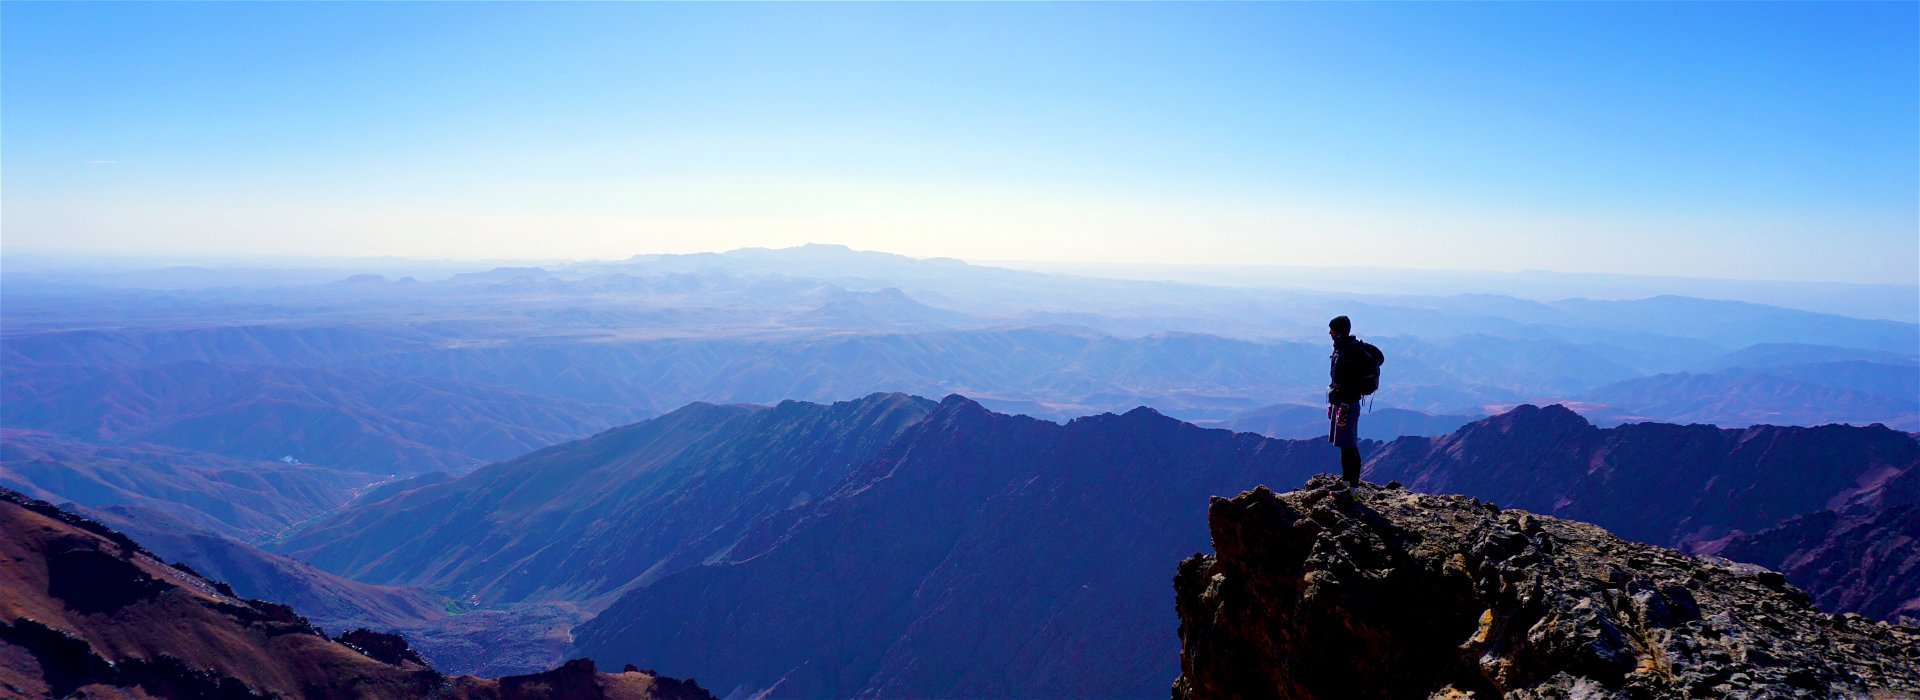 100 years since the first ascent of Mount Toubkal